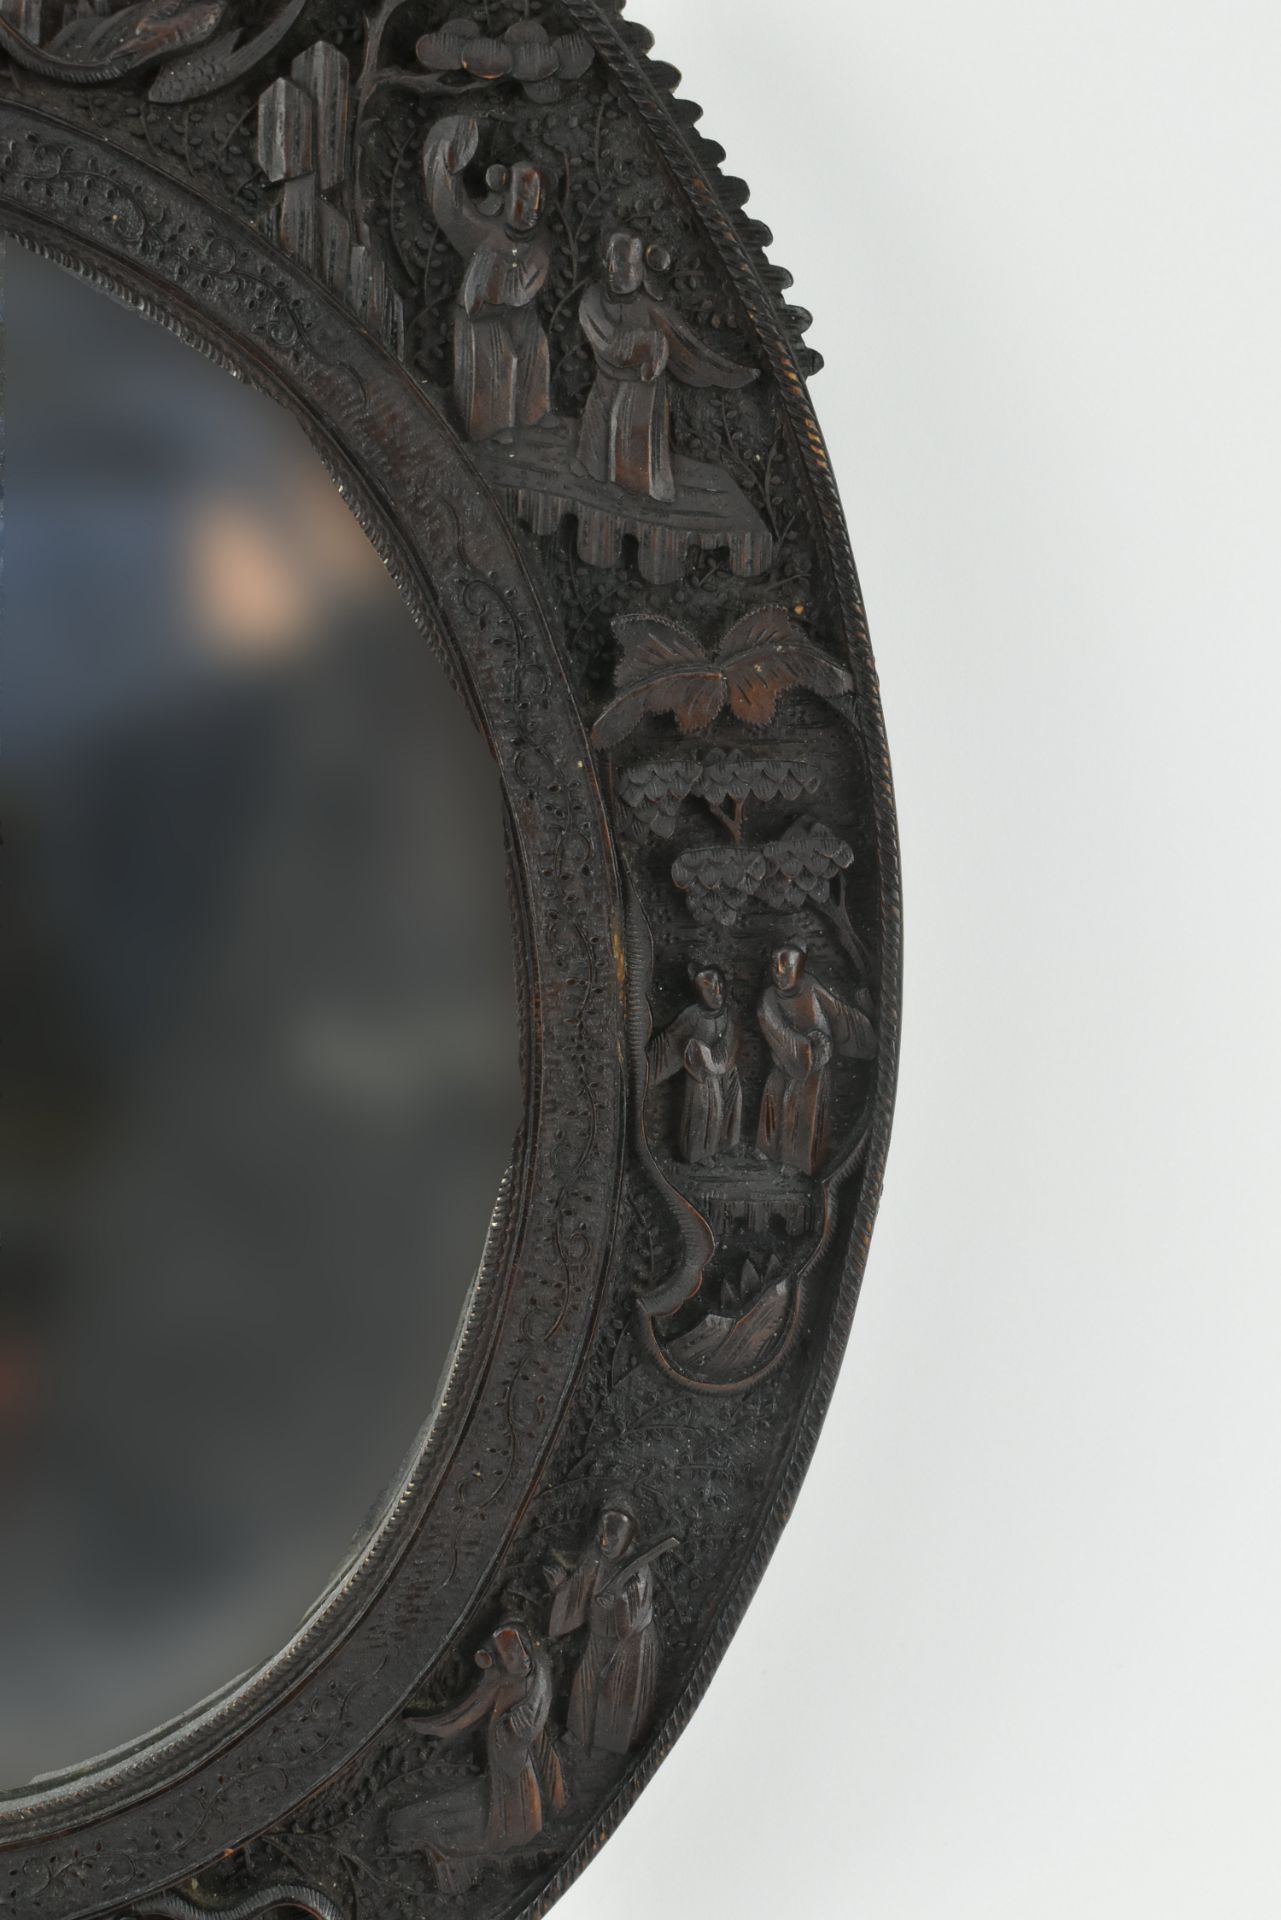 CHINESE WOODEN CARVED WALL MIRROR 民国 木框镜子 - Image 3 of 6